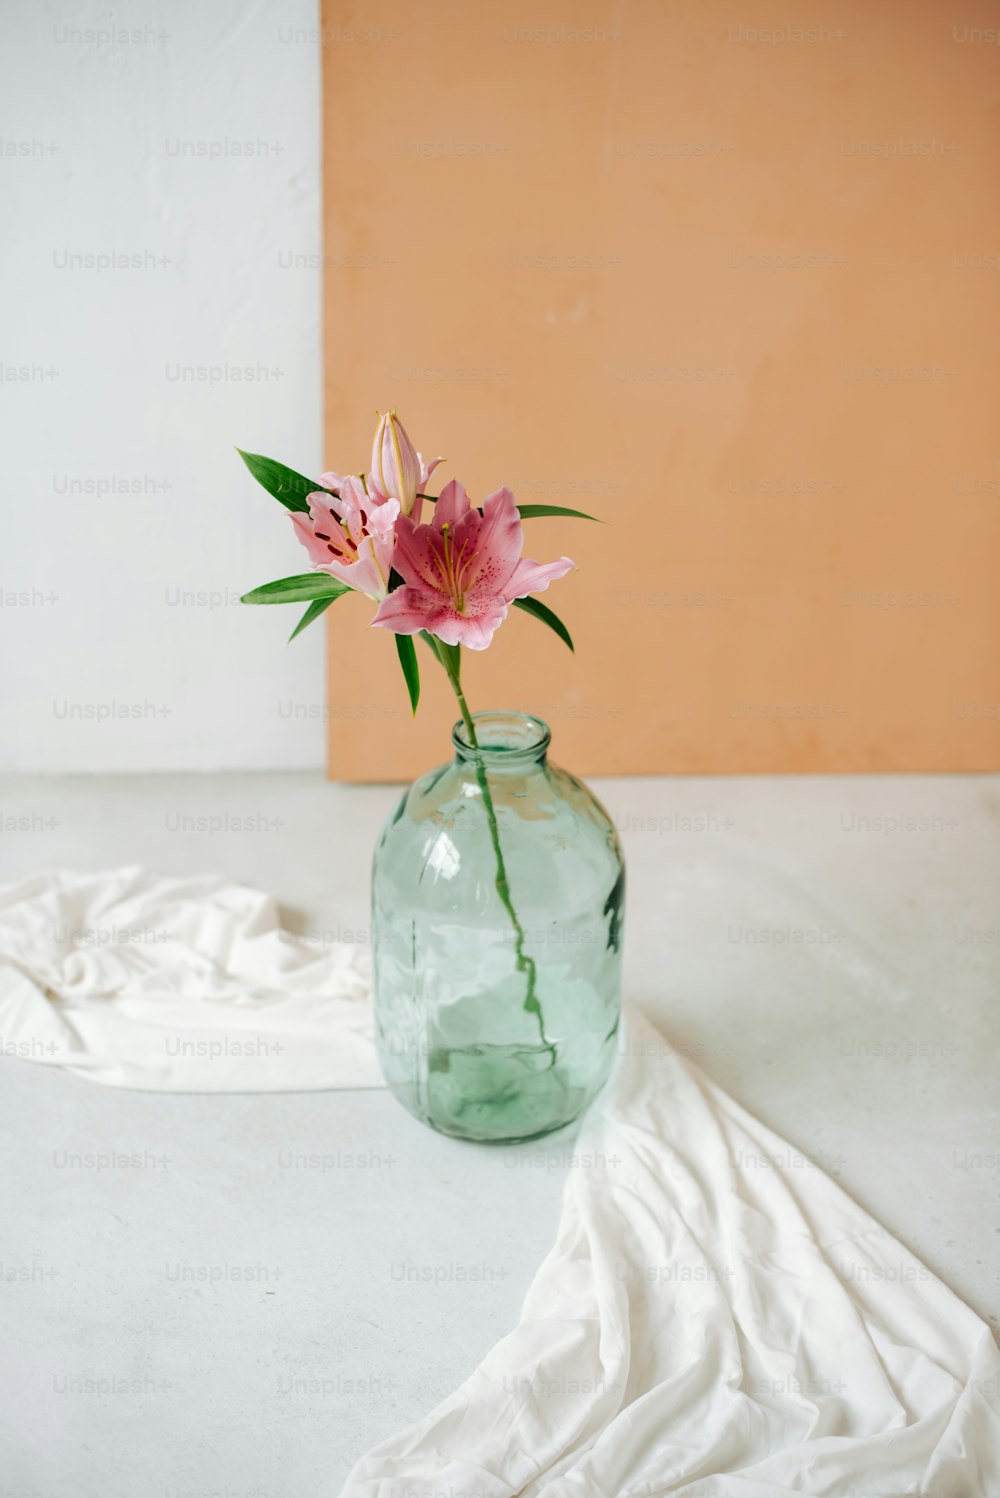 a pink flower in a glass vase on a table